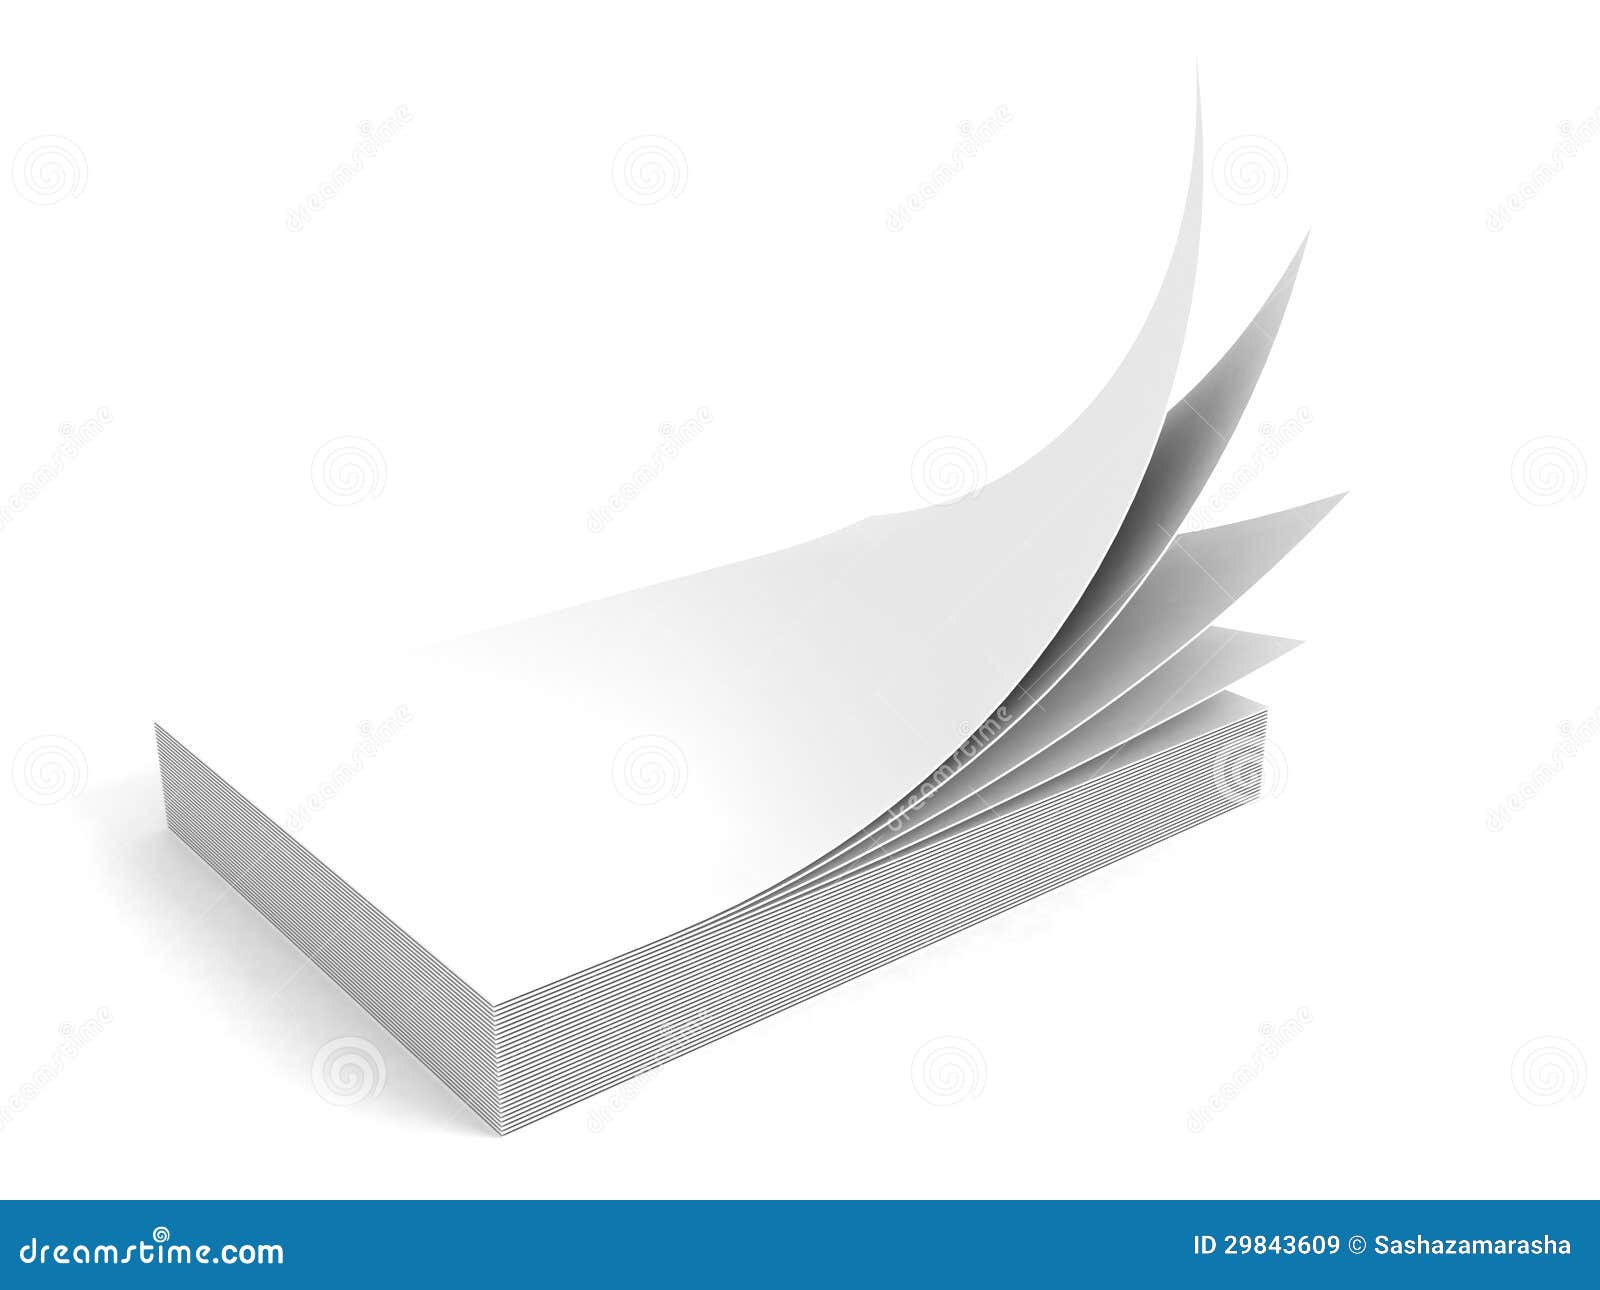 Stack of White Office Paper on White Background Stock Illustration